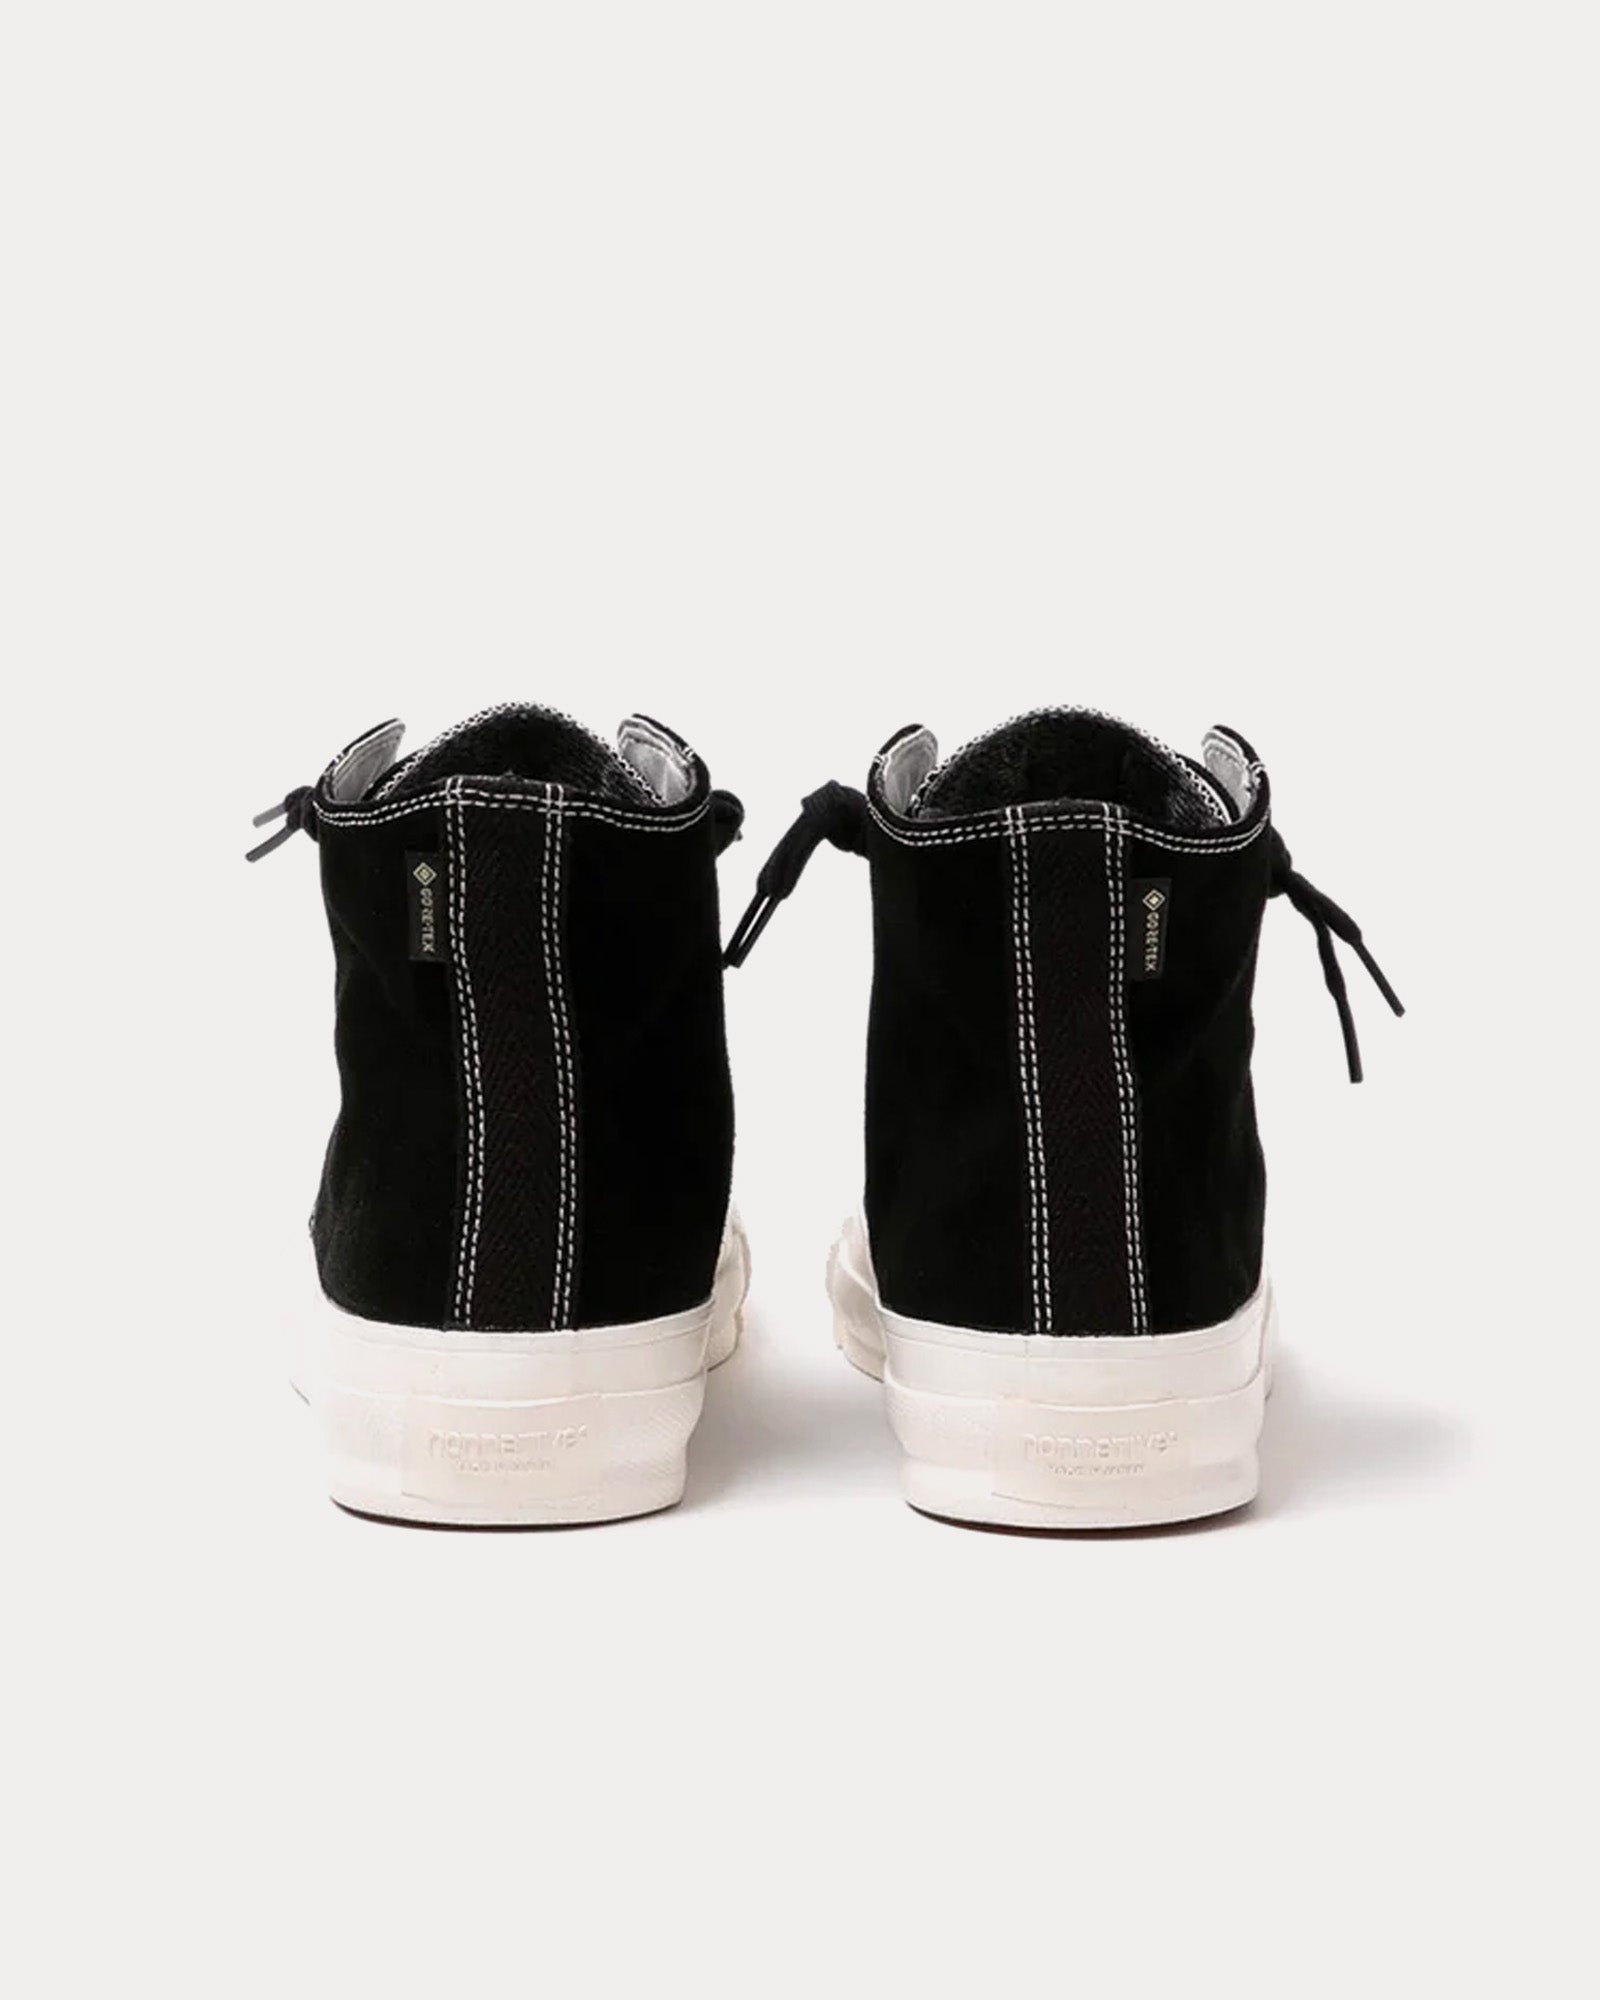 Nonnative - Dweller Hi Cow Leather with Gore-Tex Black / White High Top Sneakers